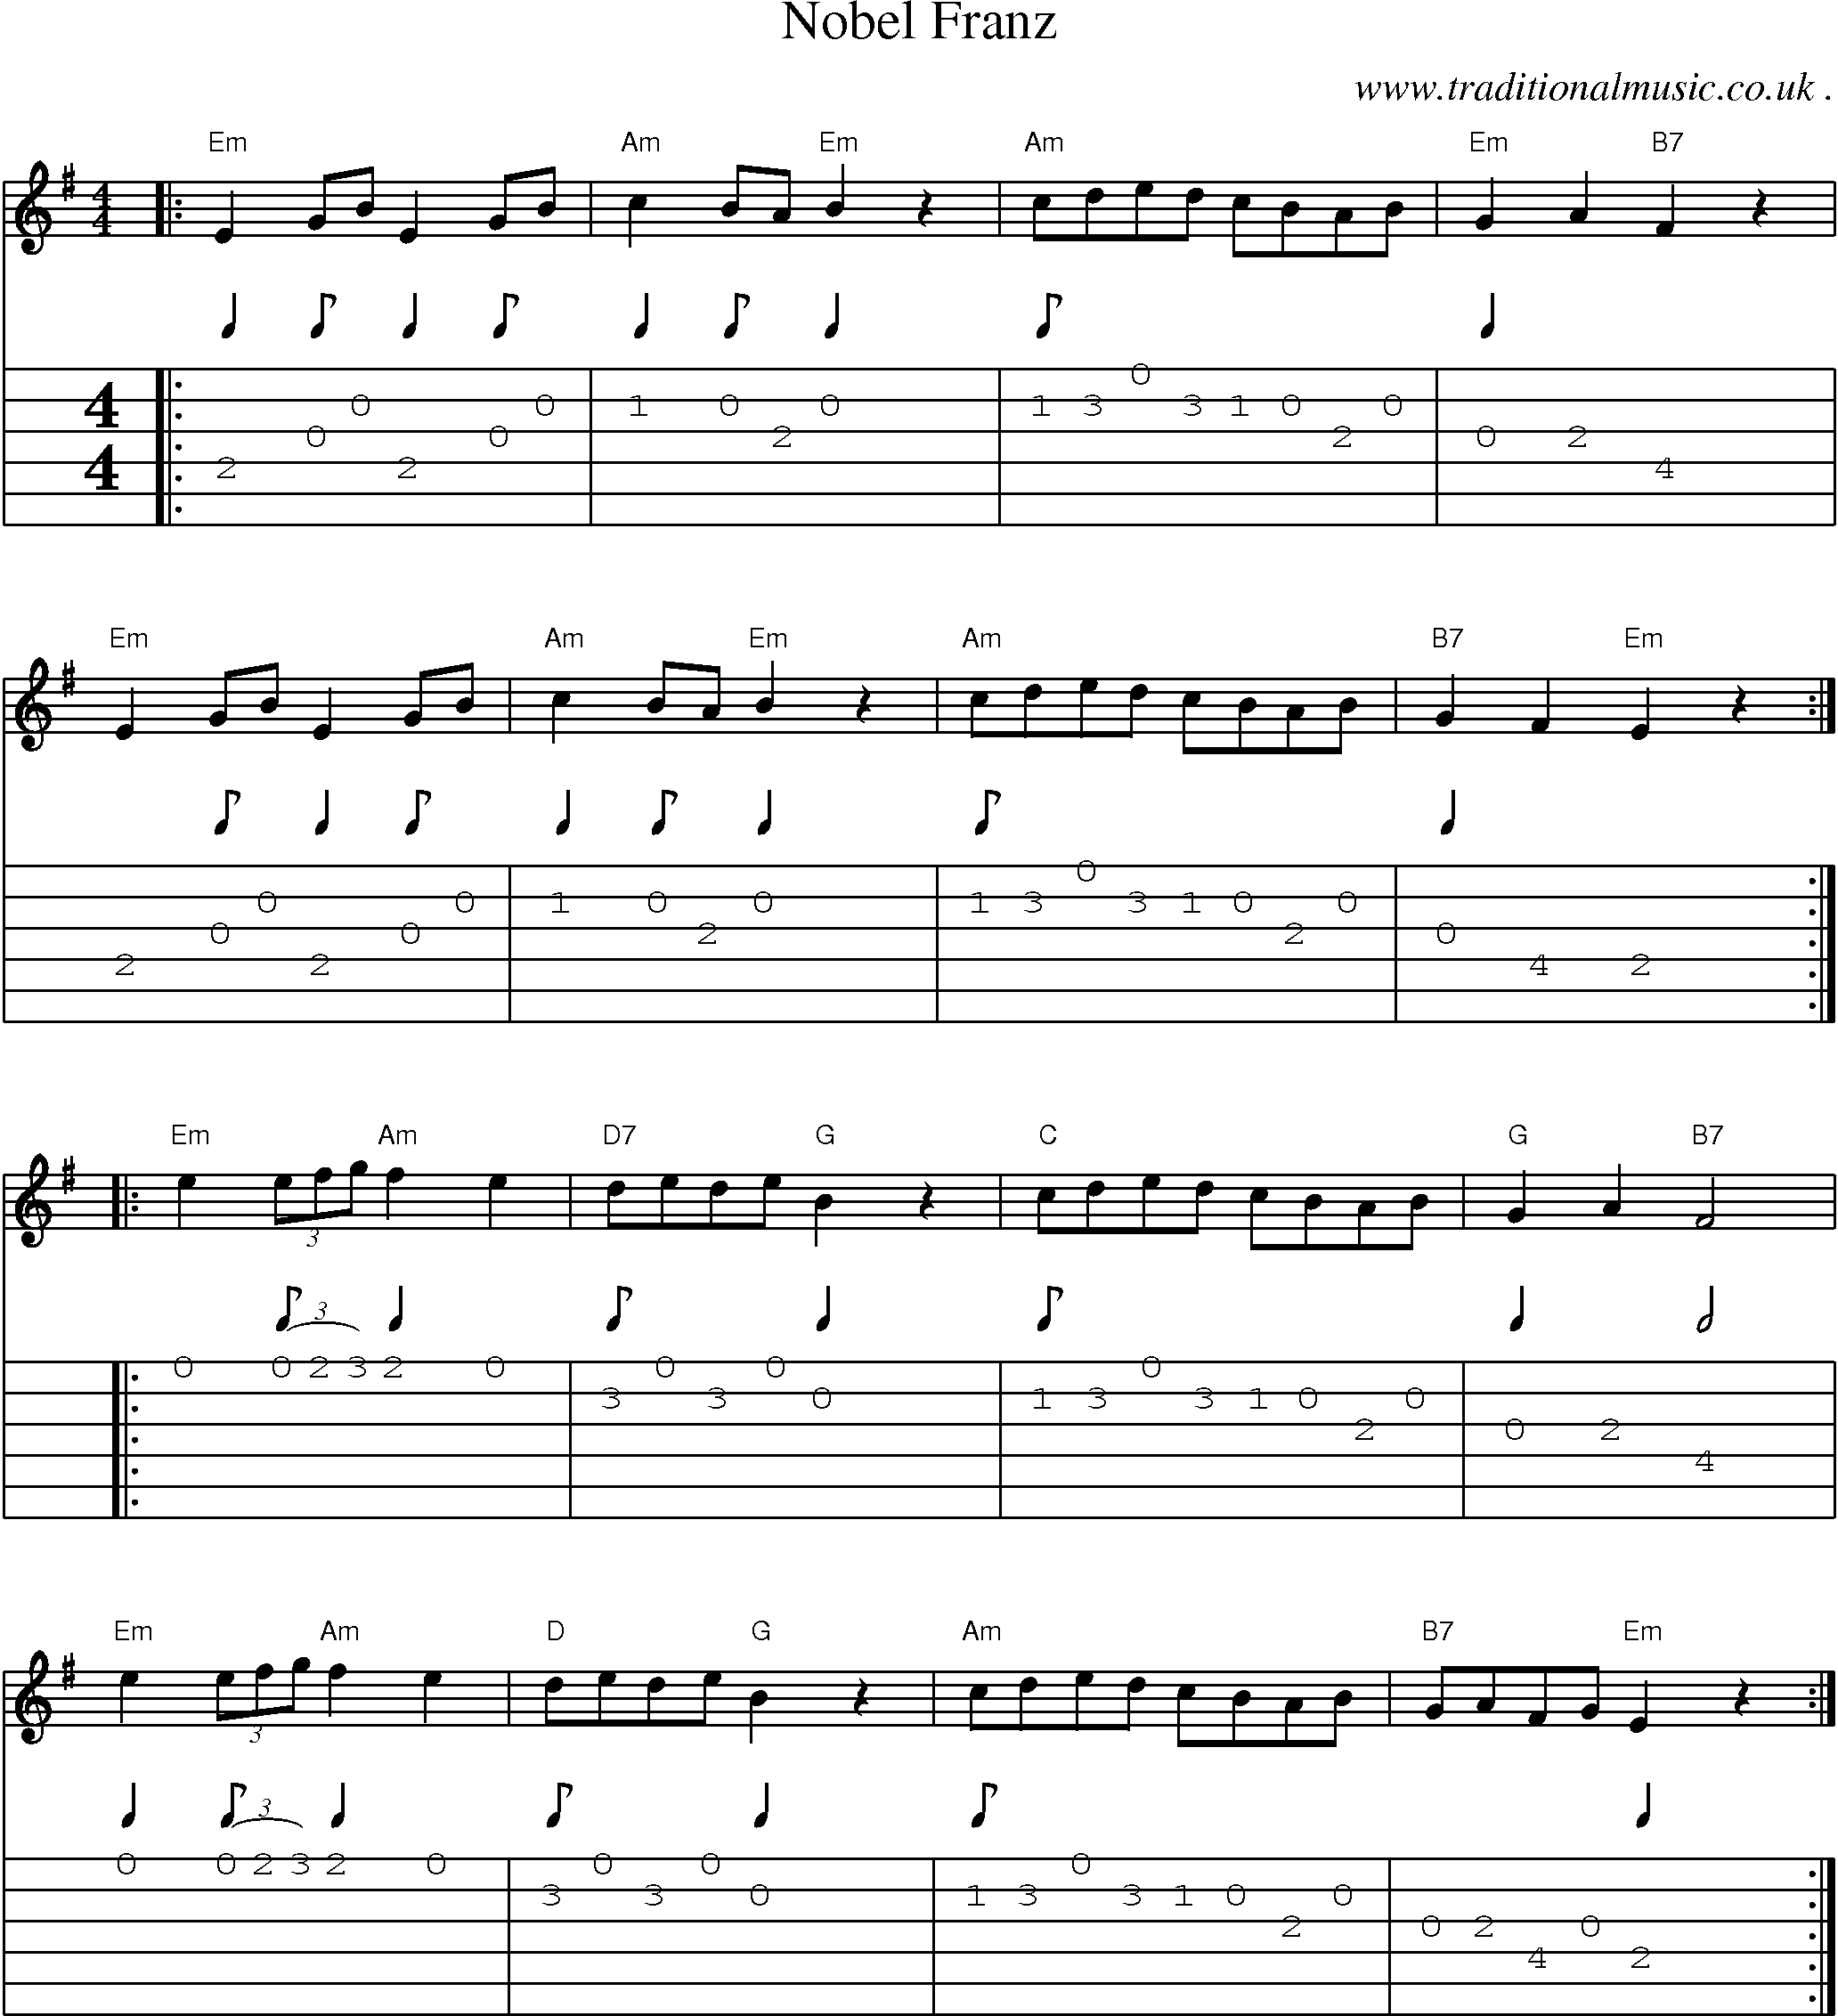 Music Score and Guitar Tabs for Nobel Franz